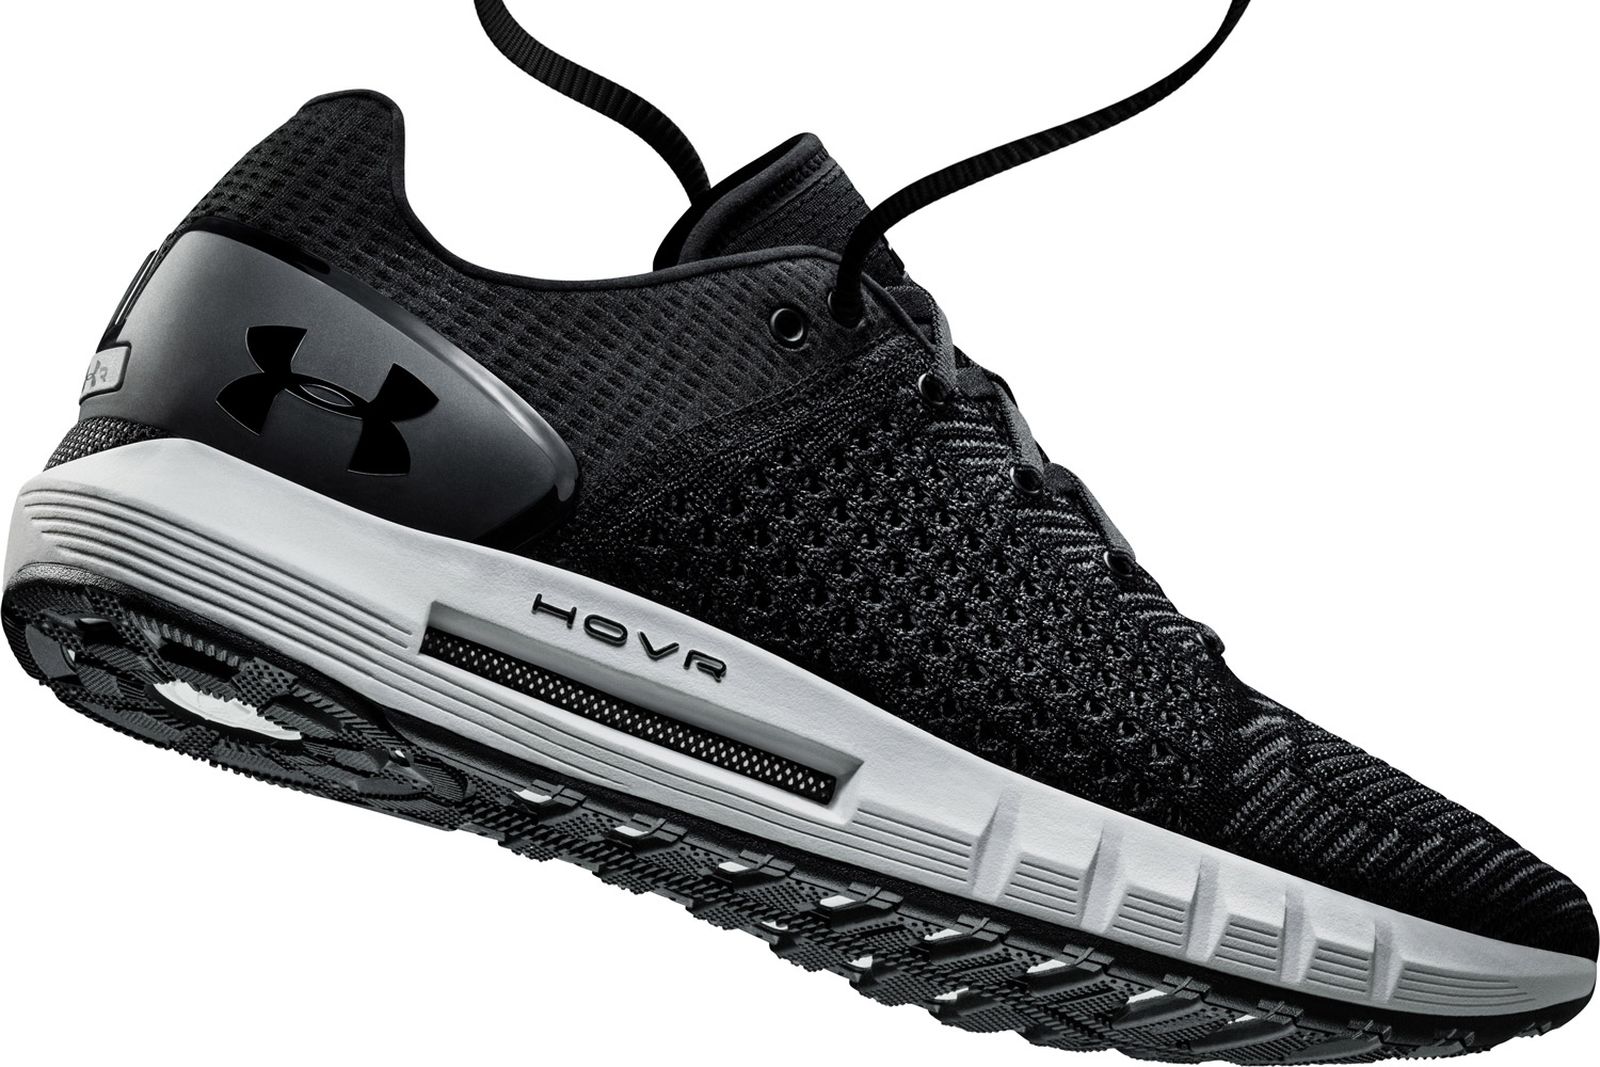 Etna wipe out Inconsistent Under Armour Launches Innovative Footwear Technology "HOVR"